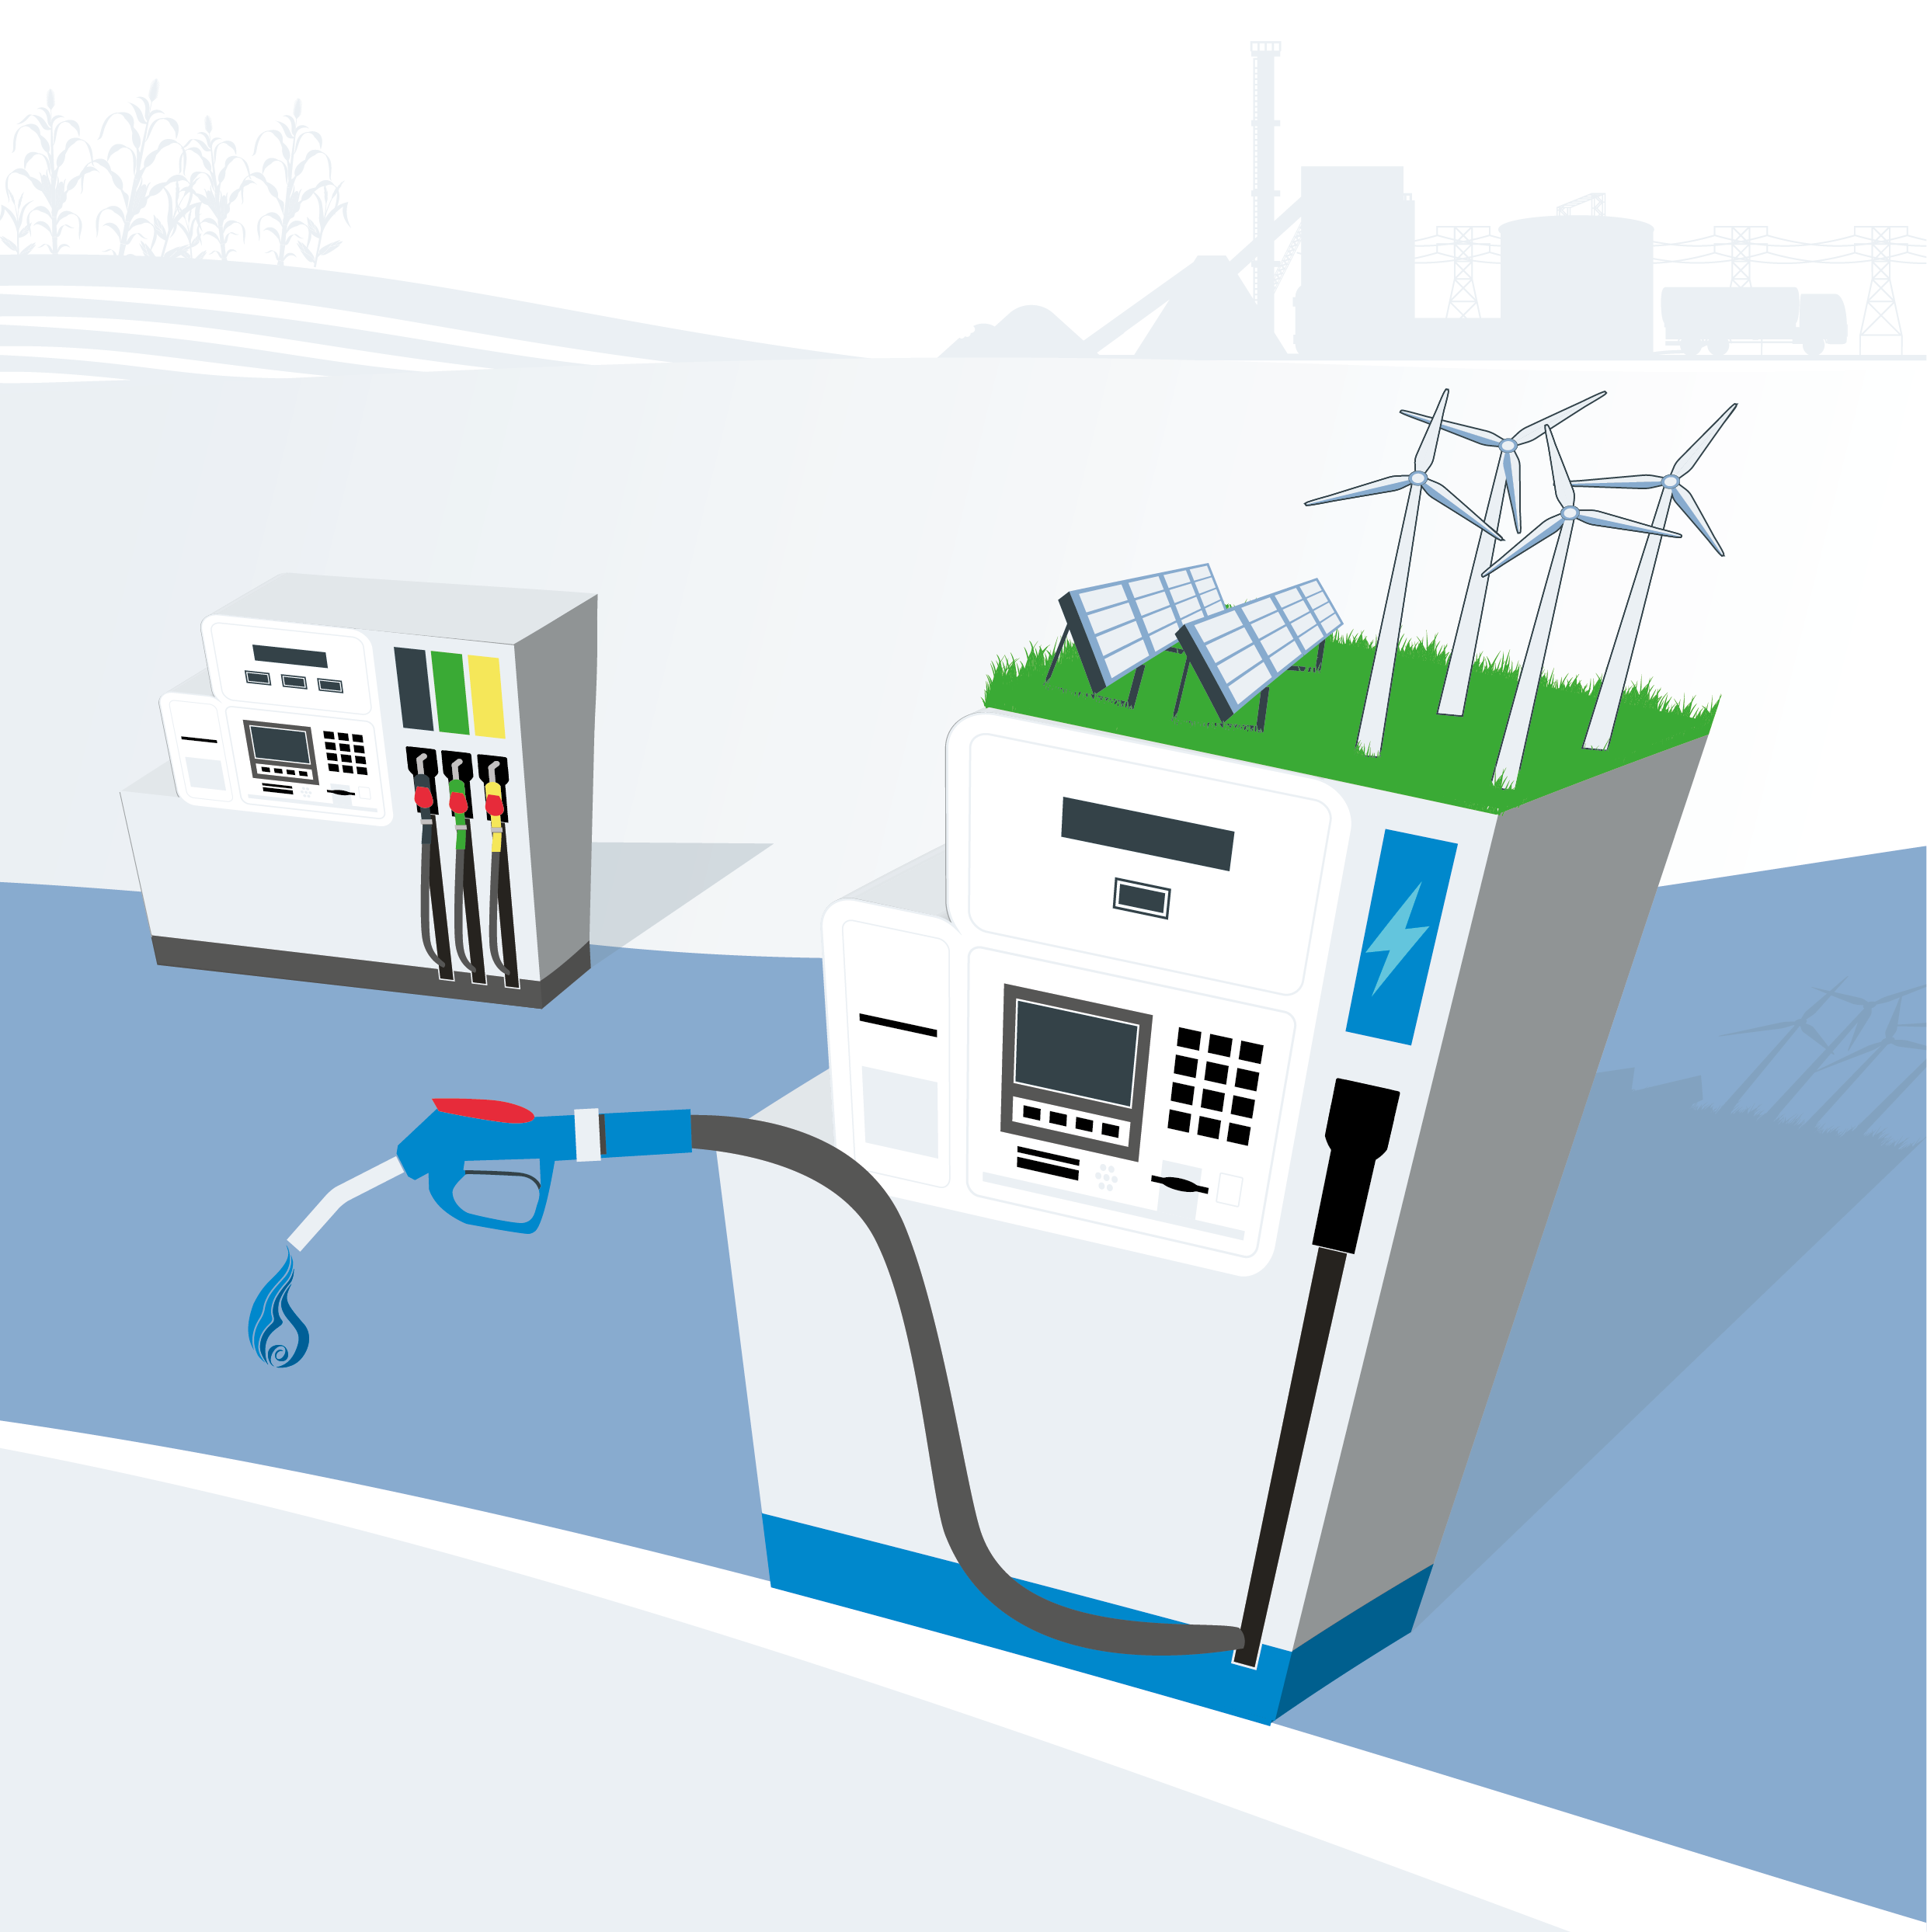 Cover image from the report "What role is there for electrofuel technologies in European transport’s low carbon future?"